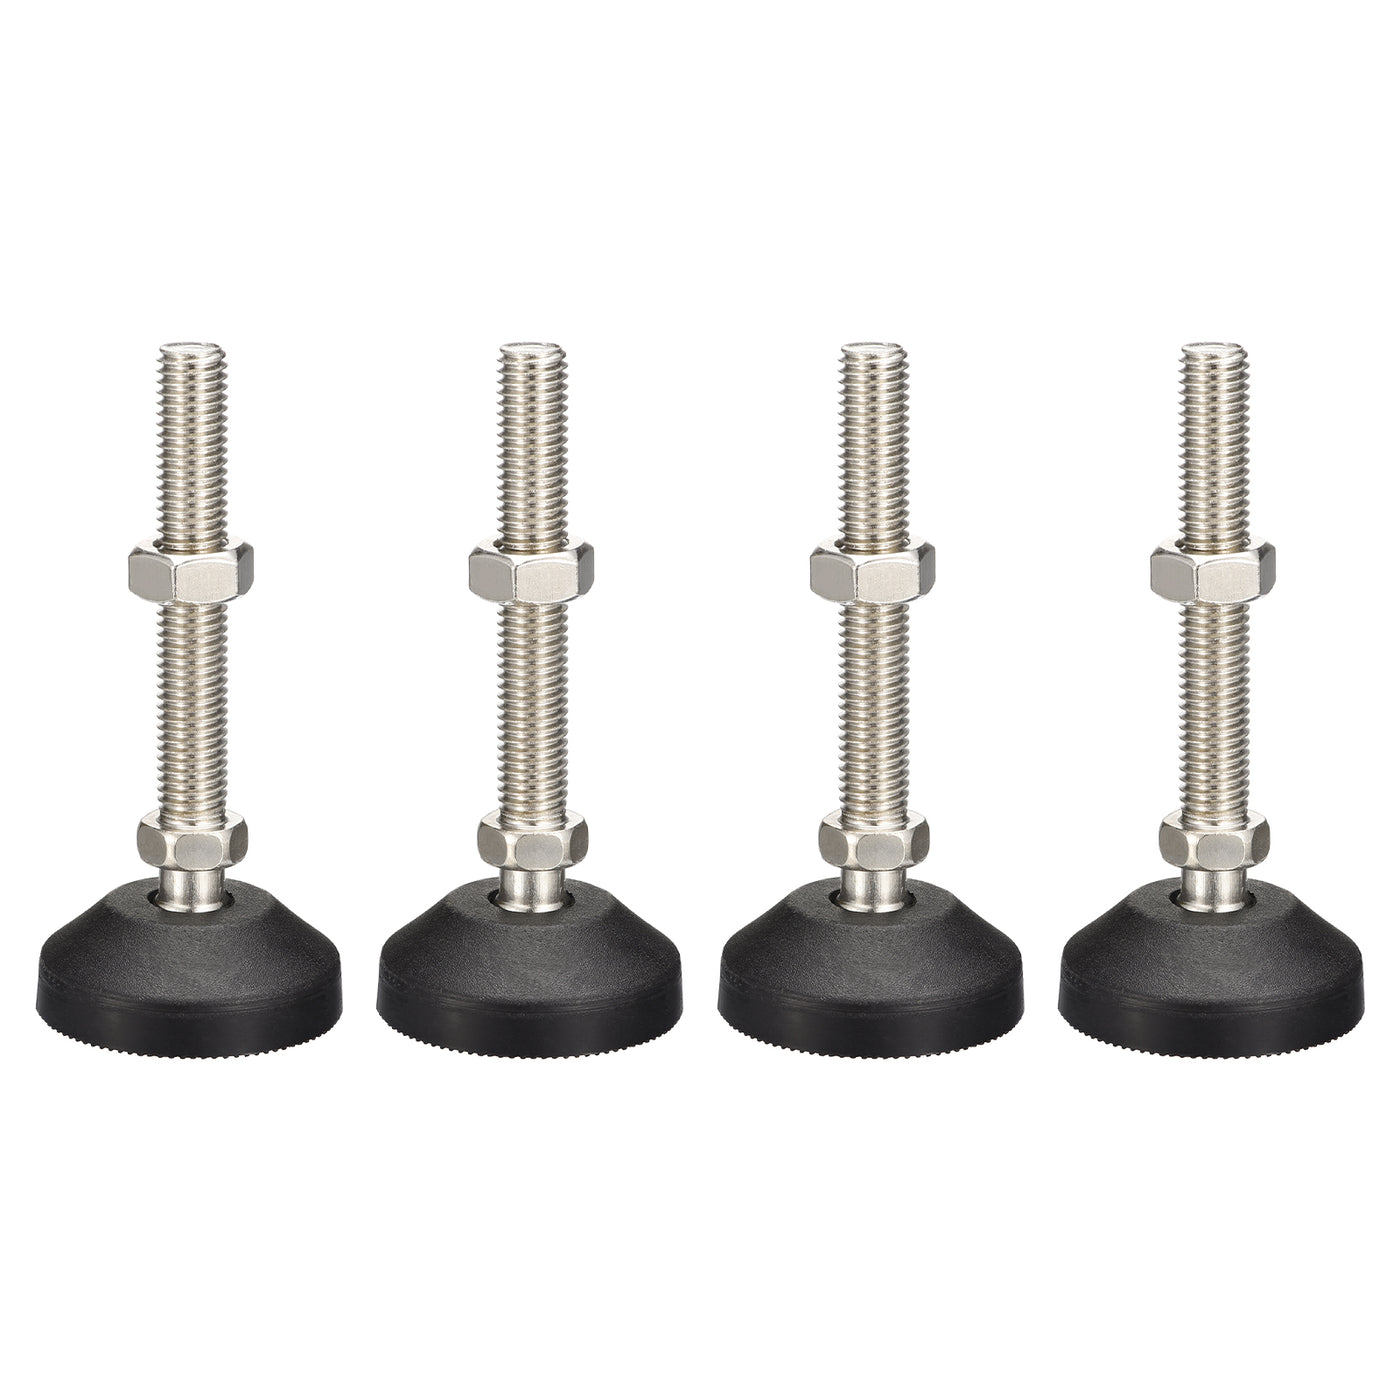 uxcell Uxcell Furniture Levelers, 4Pcs M12x80x50mm Nylon Universal Leveling Feet, Adjustable Swivel Table Feet for Furniture Workshop Machines Machinery Equipment